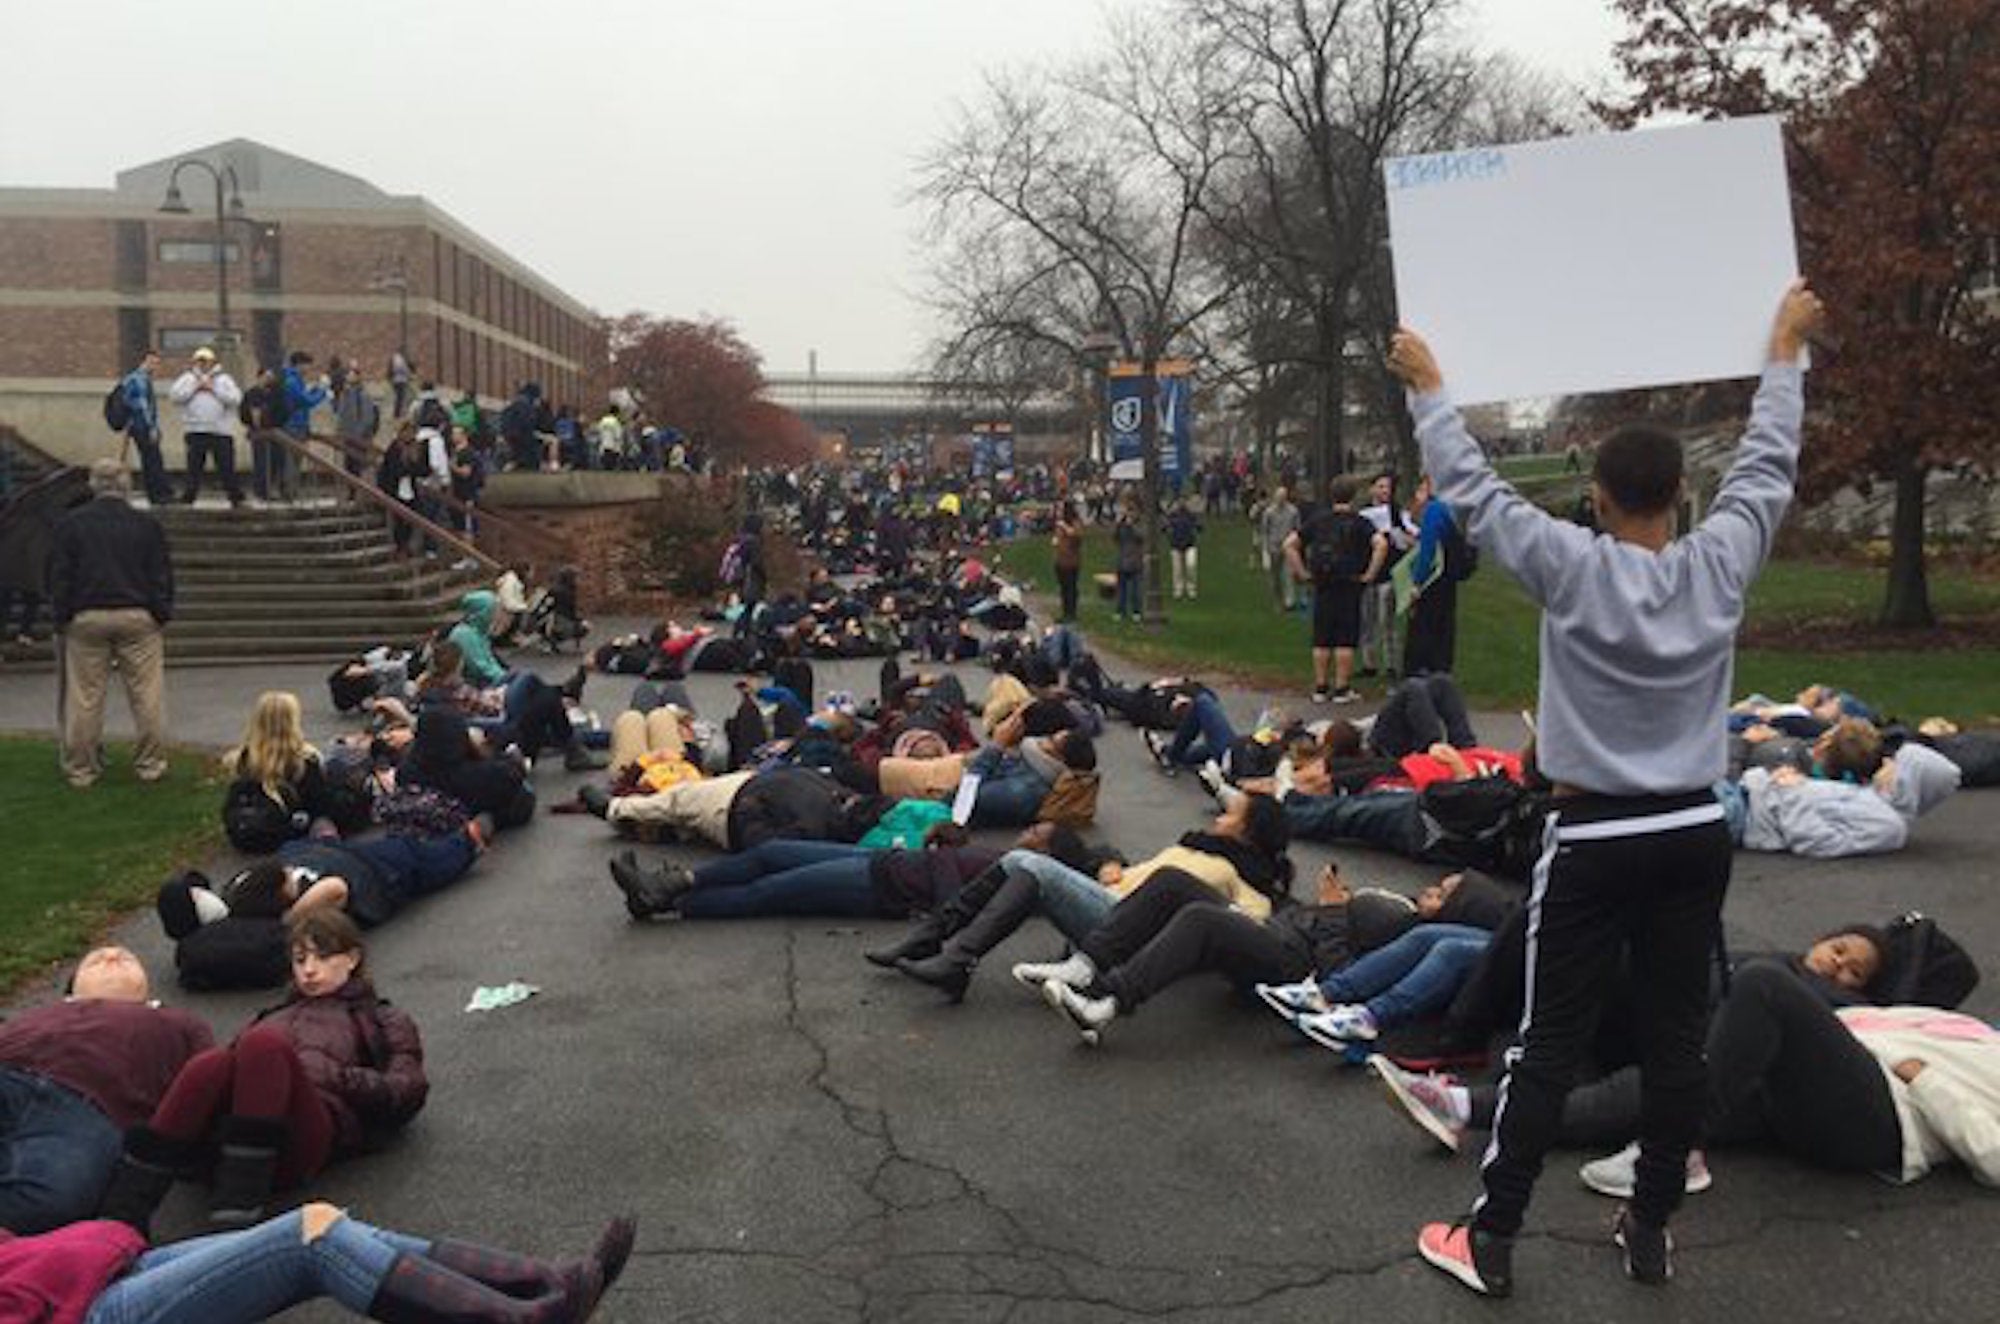 Students at Ithaca College called for President Rochon to resign